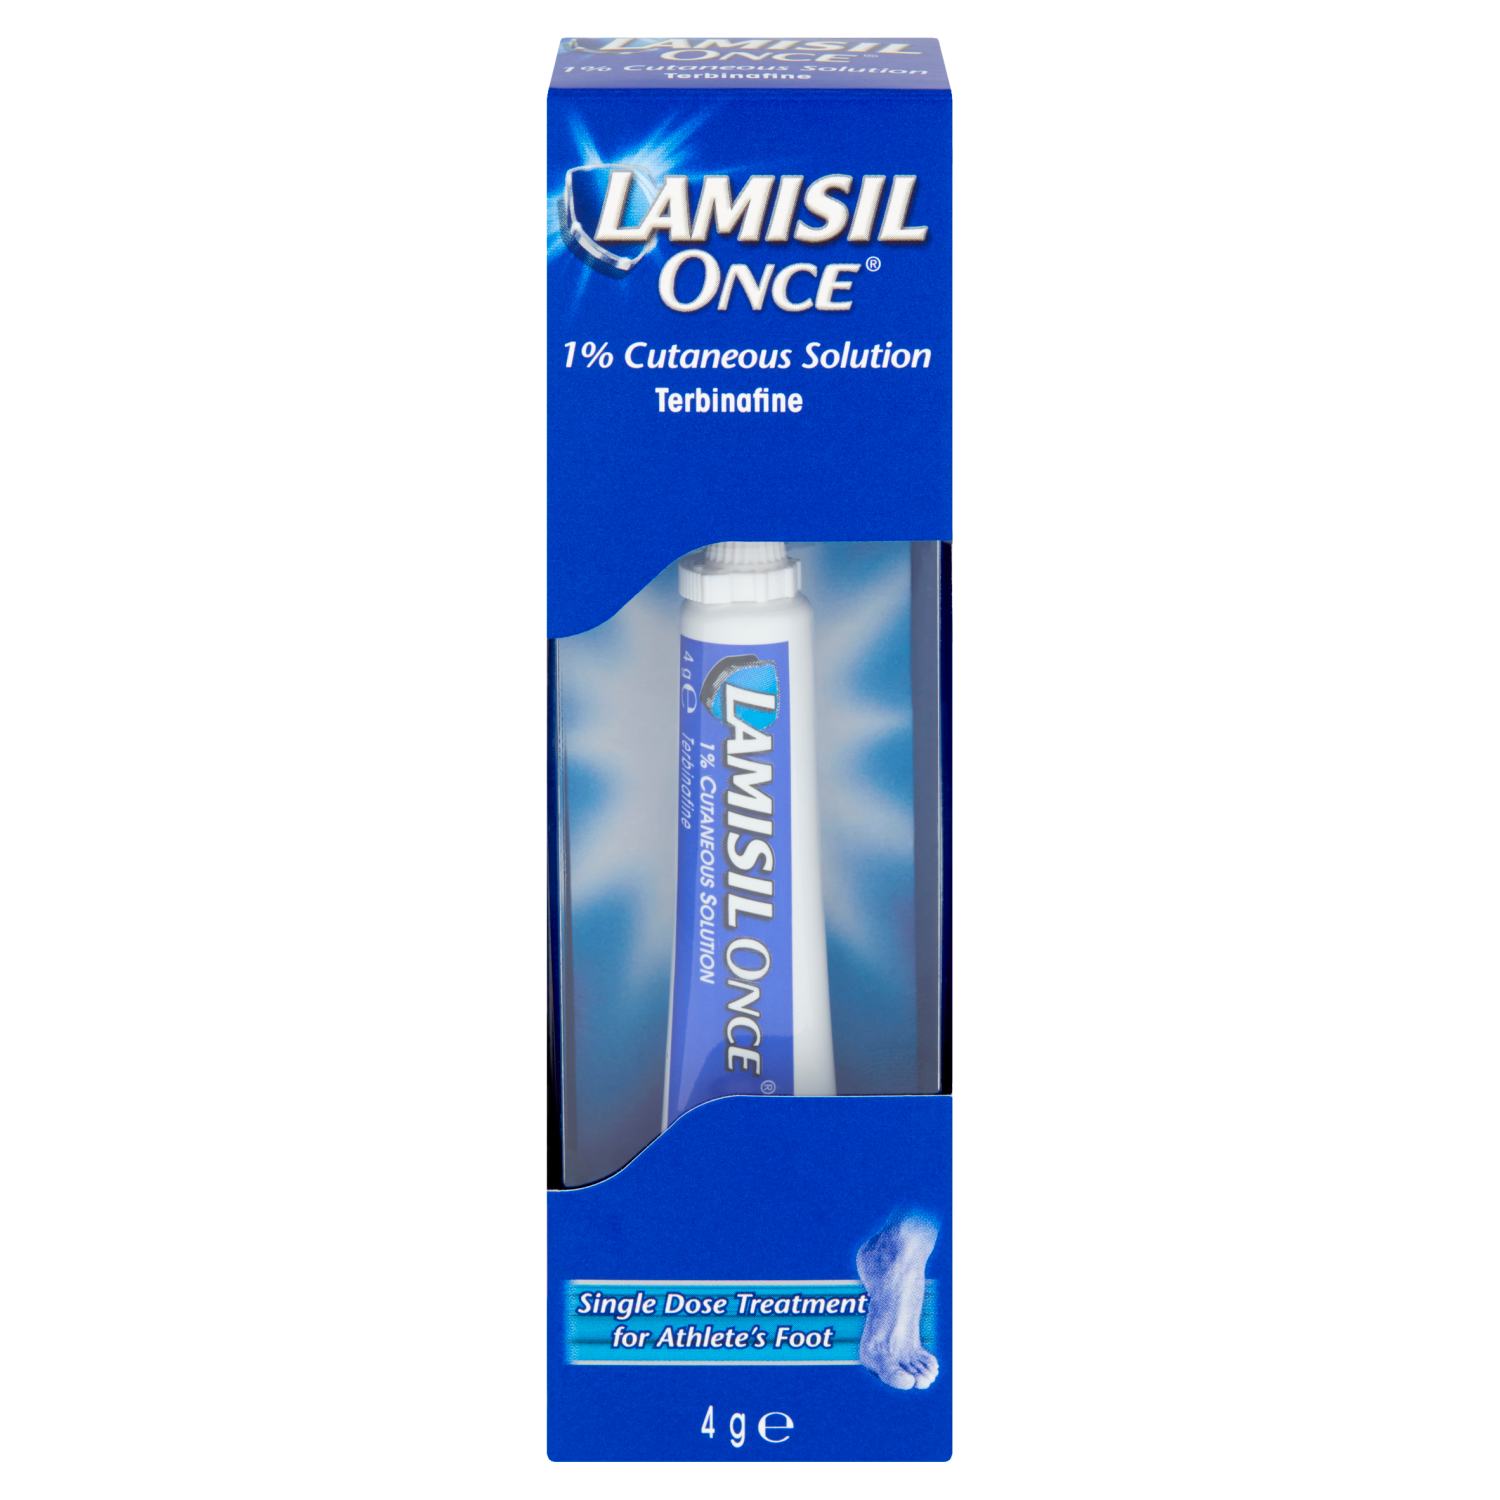 Lamisil Once 1% Cutaneous Solution 4g